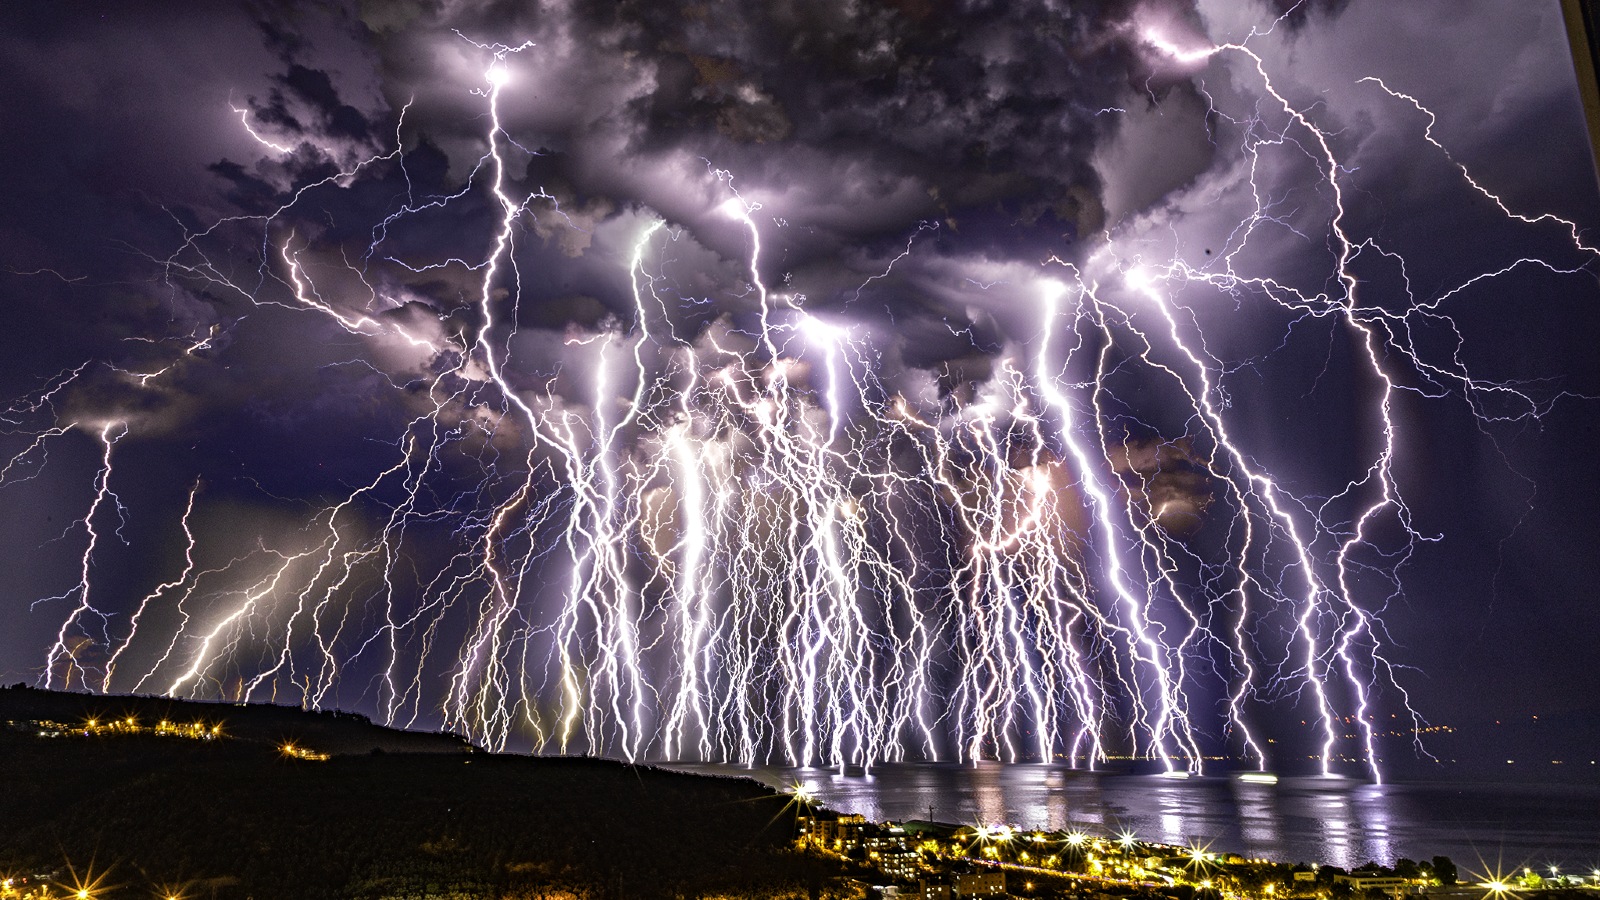 Electrifying Time Lapse Image Captures 100 Lightning Bolts Torching The